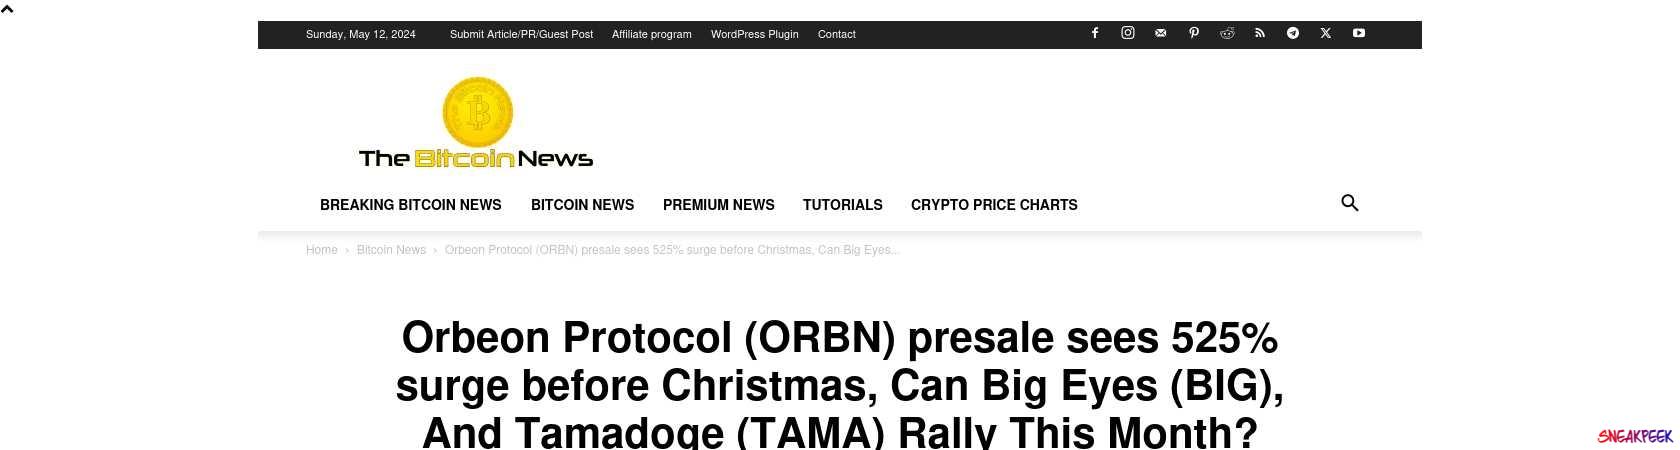 Read the full Article:  ⭲ Orbeon Protocol (ORBN) presale sees 525% surge before Christmas, Can Big Eyes (BIG), And Tamadoge (TAMA) Rally This Month?